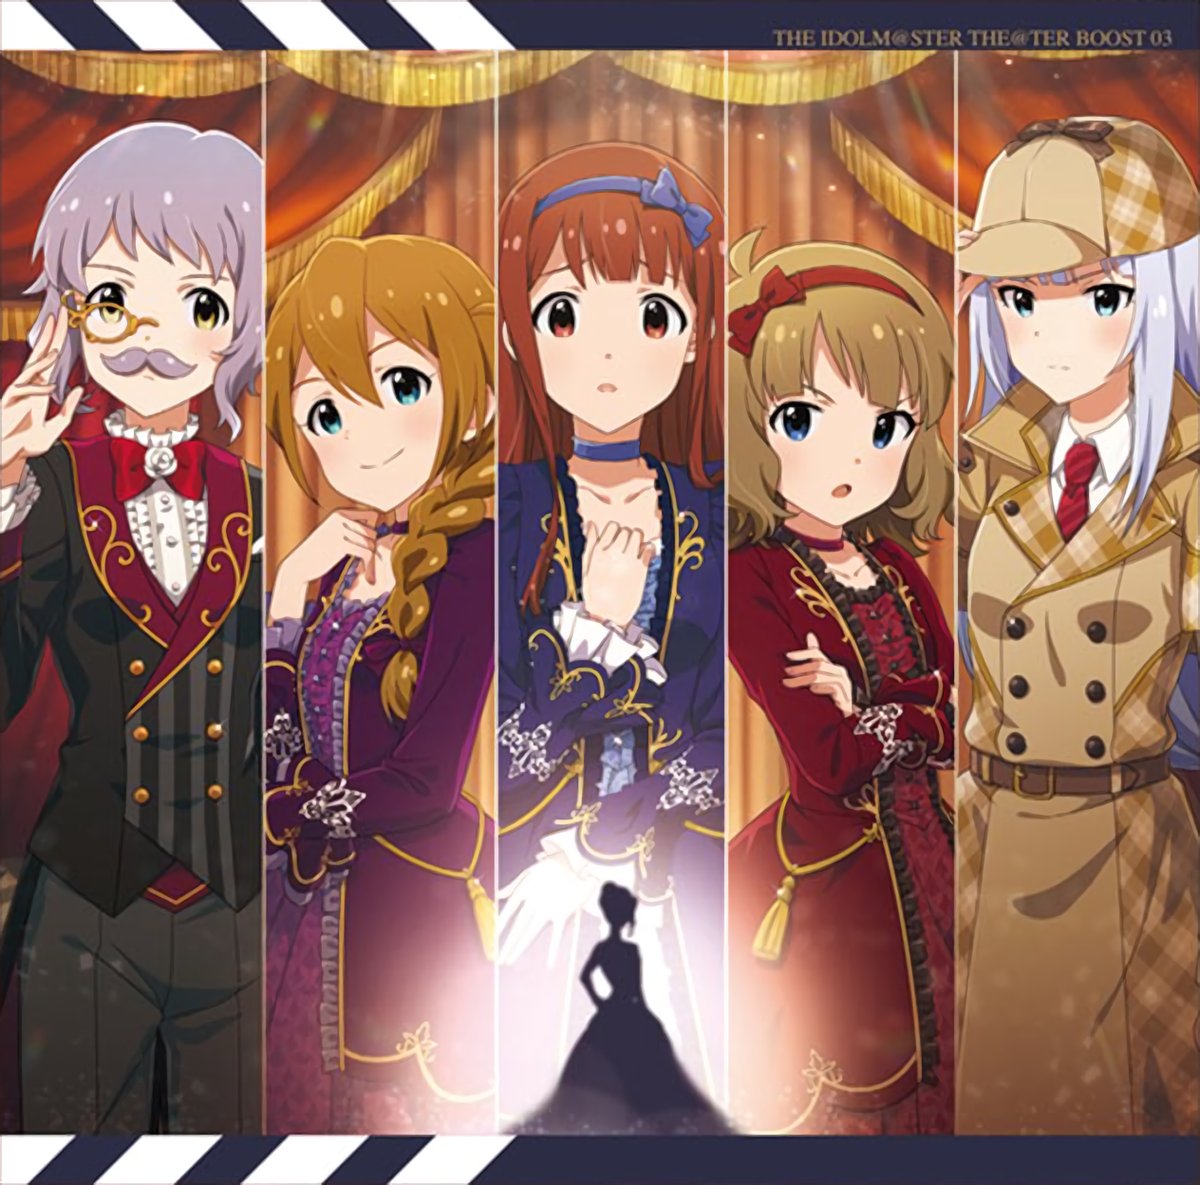 THE IDOLM@STER THE@TER BOOST 03 | THE iDOLM@STER: Million Live 